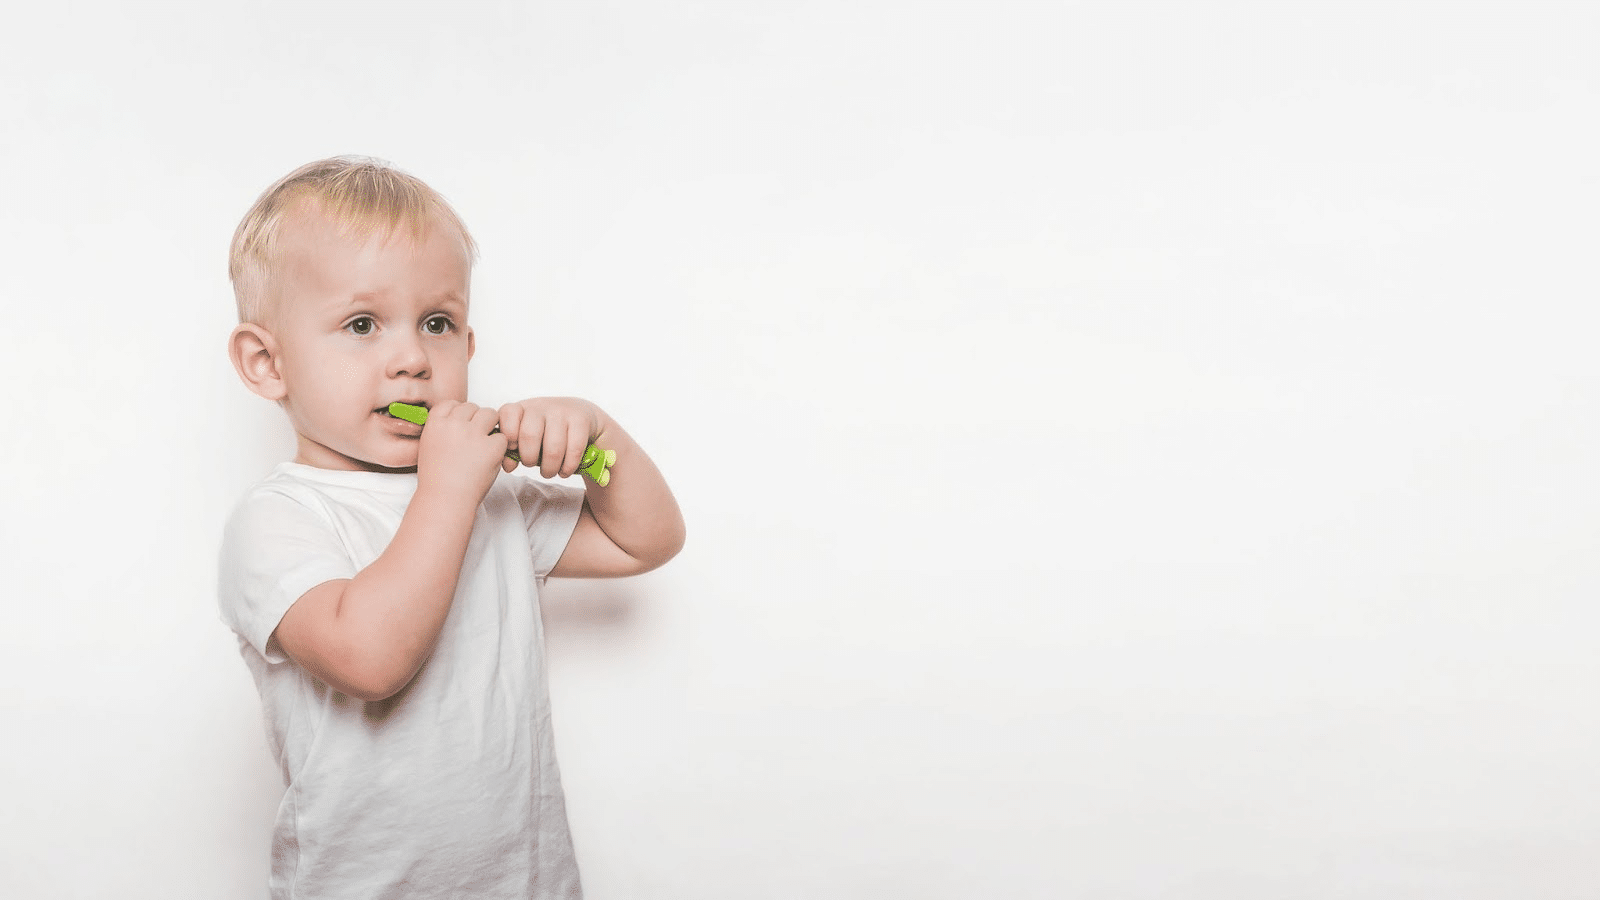 Toddler boy in white shirt brushing teeth with green toothbrush while standing in front of white wall